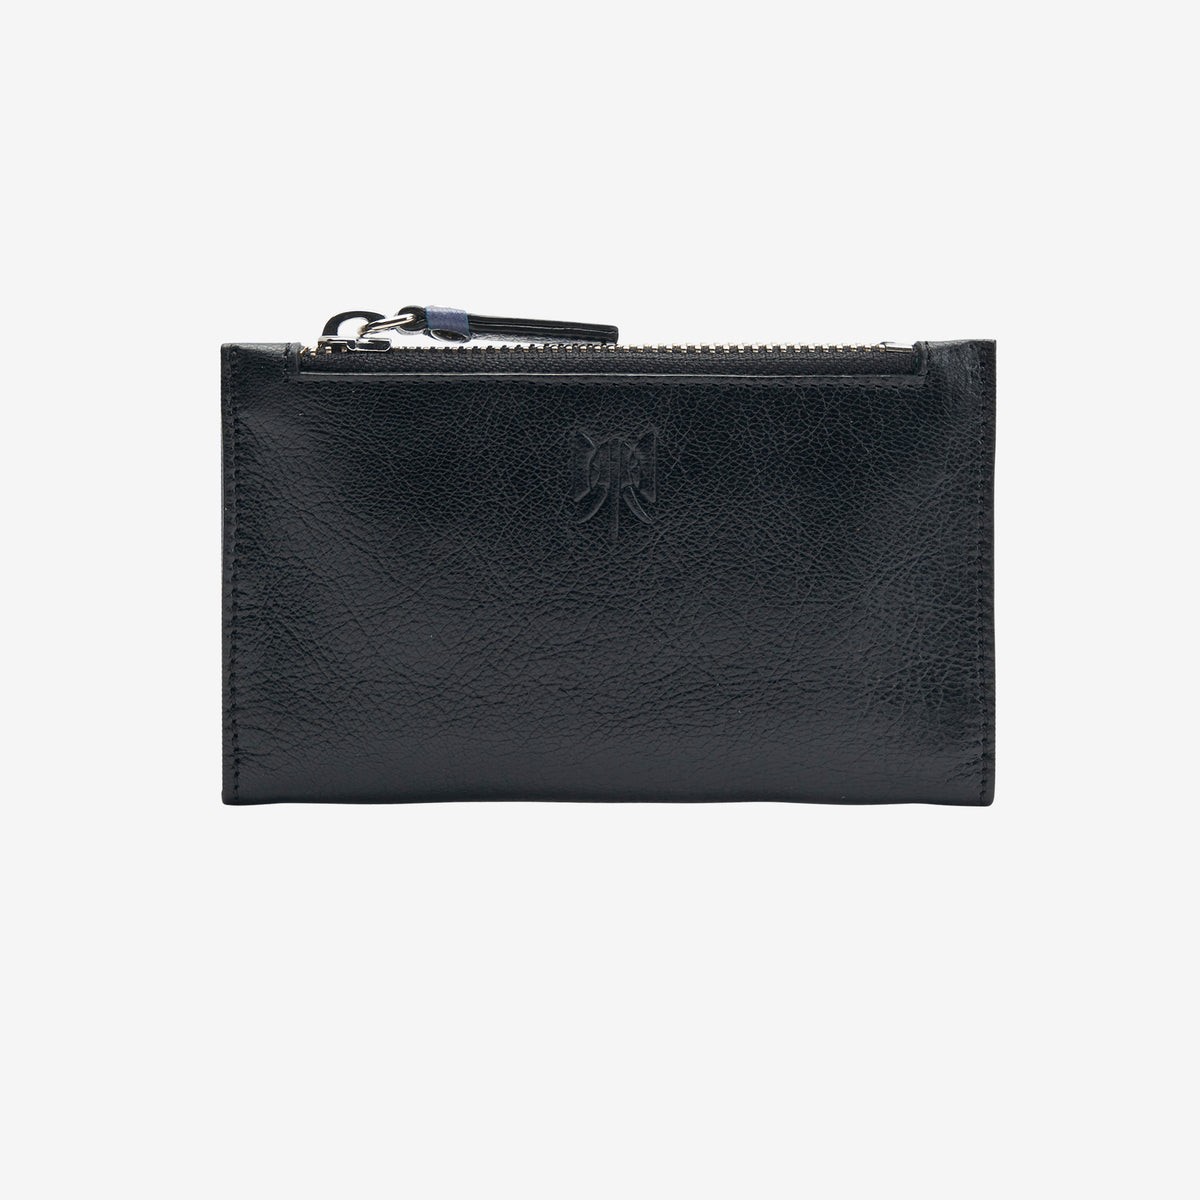     tusk-383-leather-slim-card-case-with-zip-coin-pocket-black-and-french-blue-front